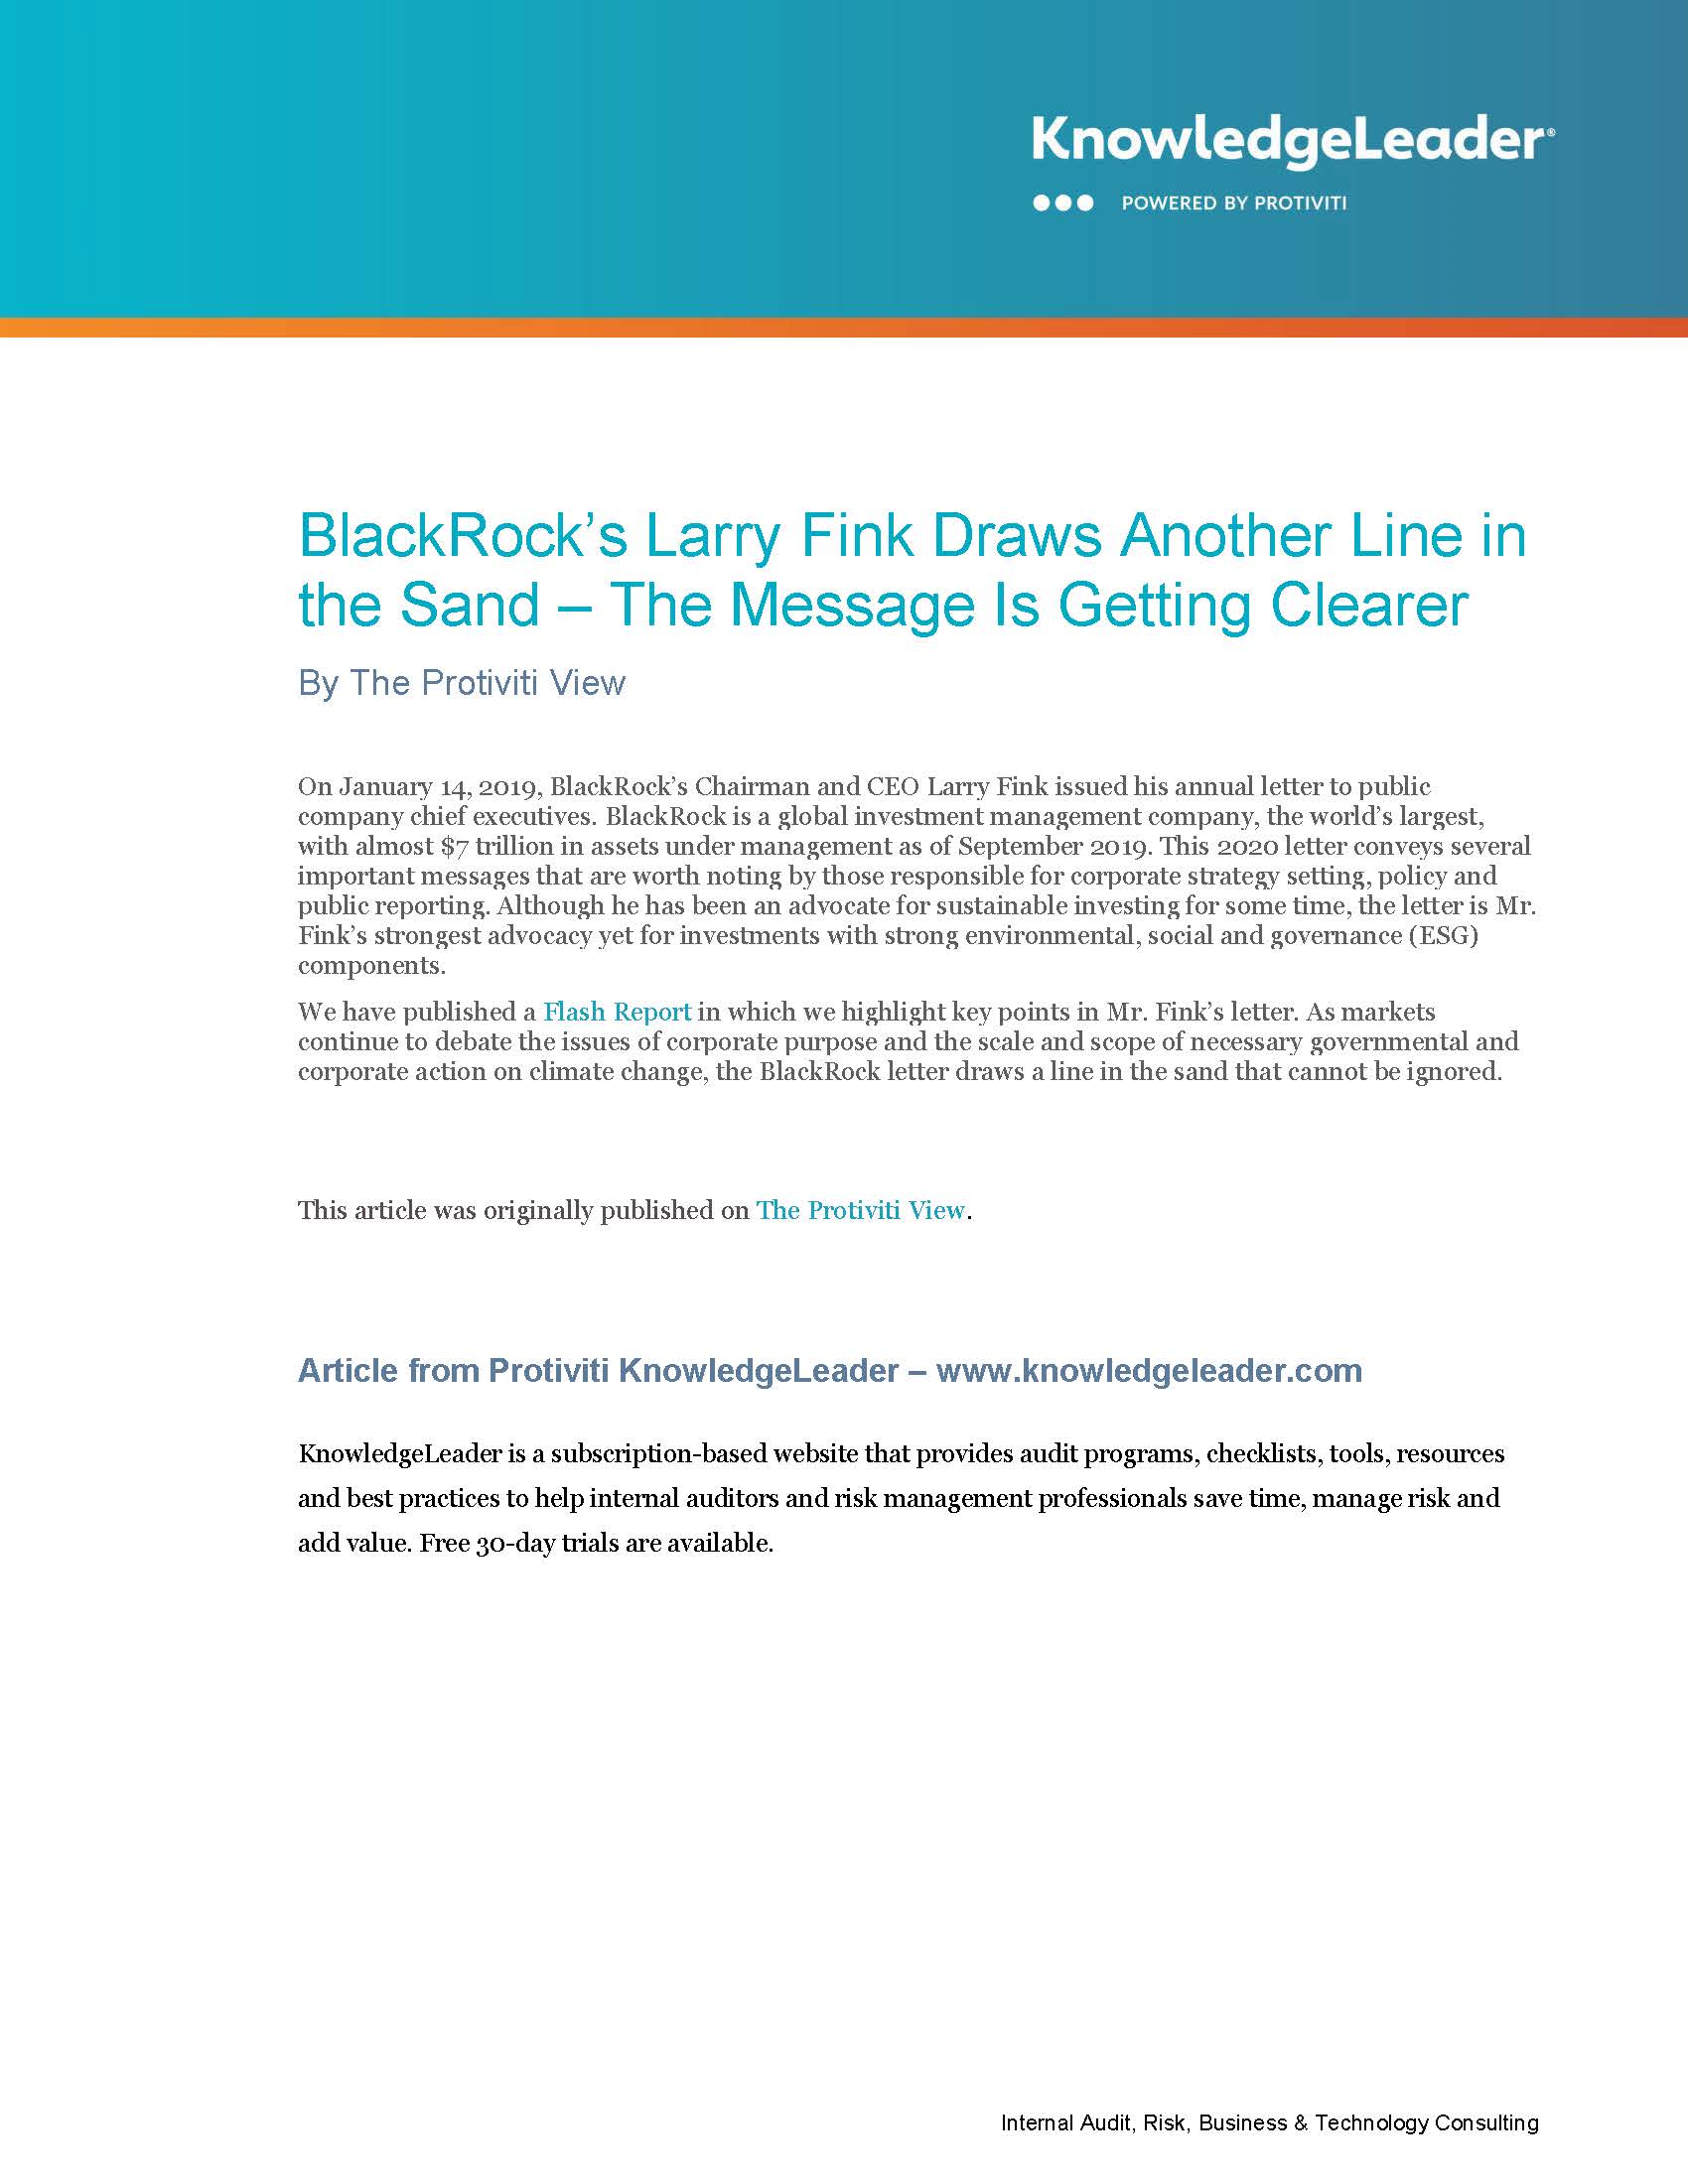 Screenshot of the first page of BlackRock’s Larry Fink Draws Another Line in the Sand — The Message is Getting Clearer